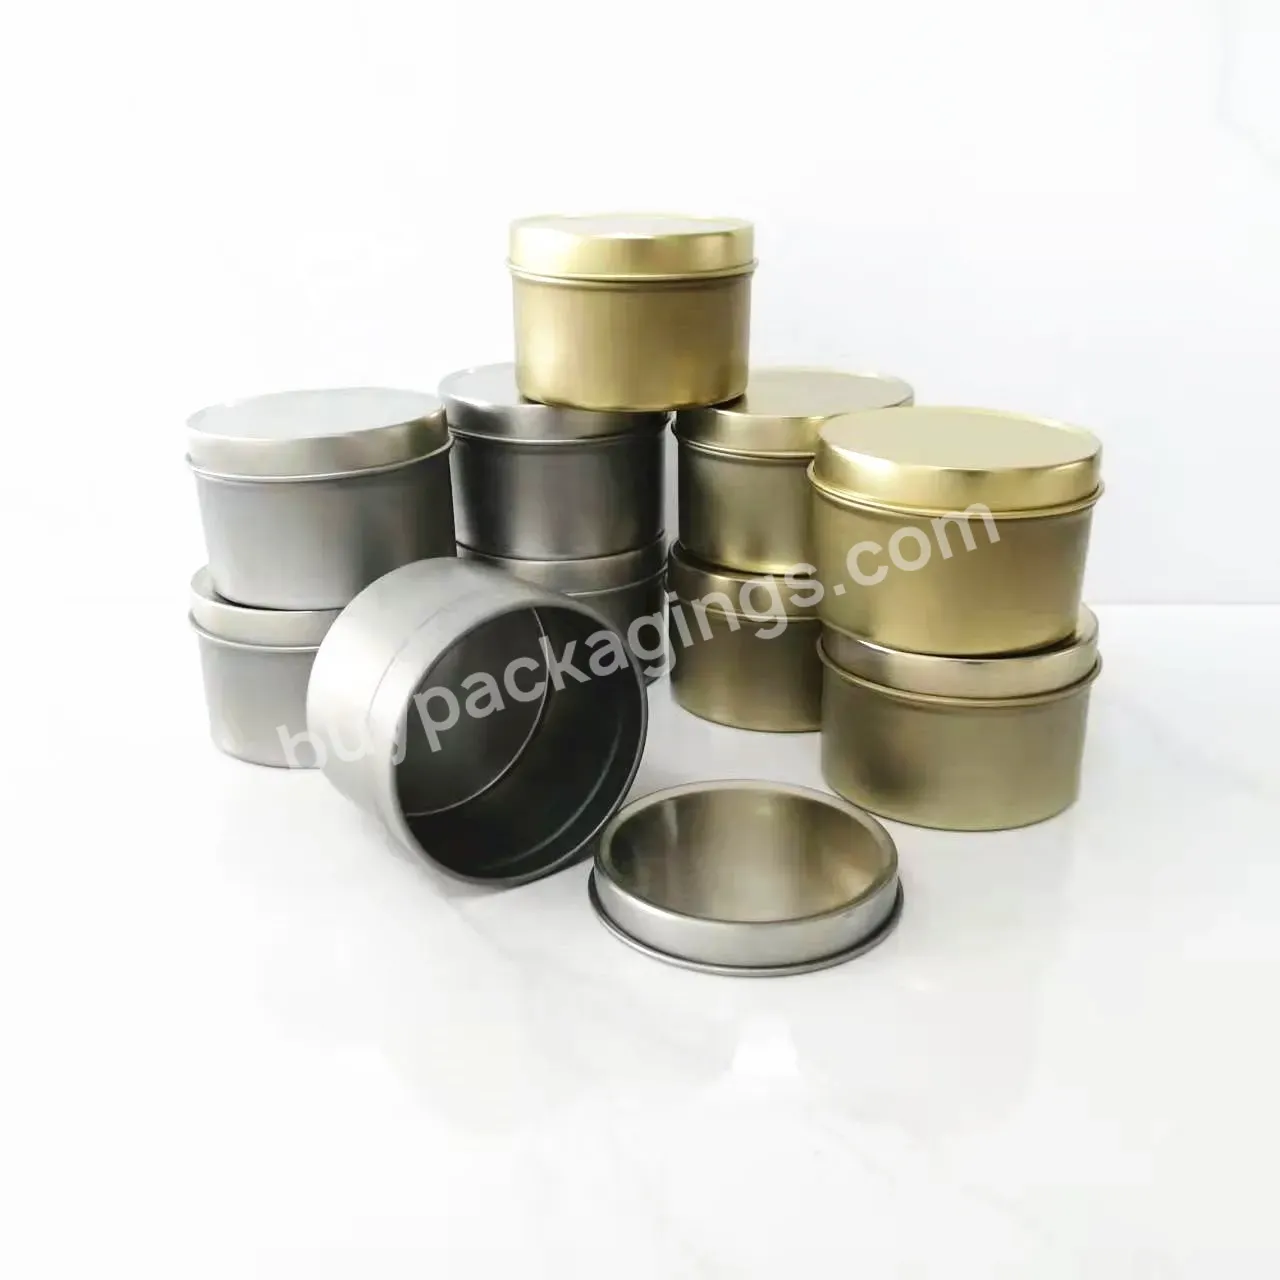 Factory Large Stock 2oz Candle Tins With Lids In Bulk Scented Soy Wax Candle Tin For Candle Making D50x40hmm - Buy Diy Scented Soy Wax Candles Making Kit Supplies In Tins,Soy Candle In Tin,Miraca Candle Tin Matte.